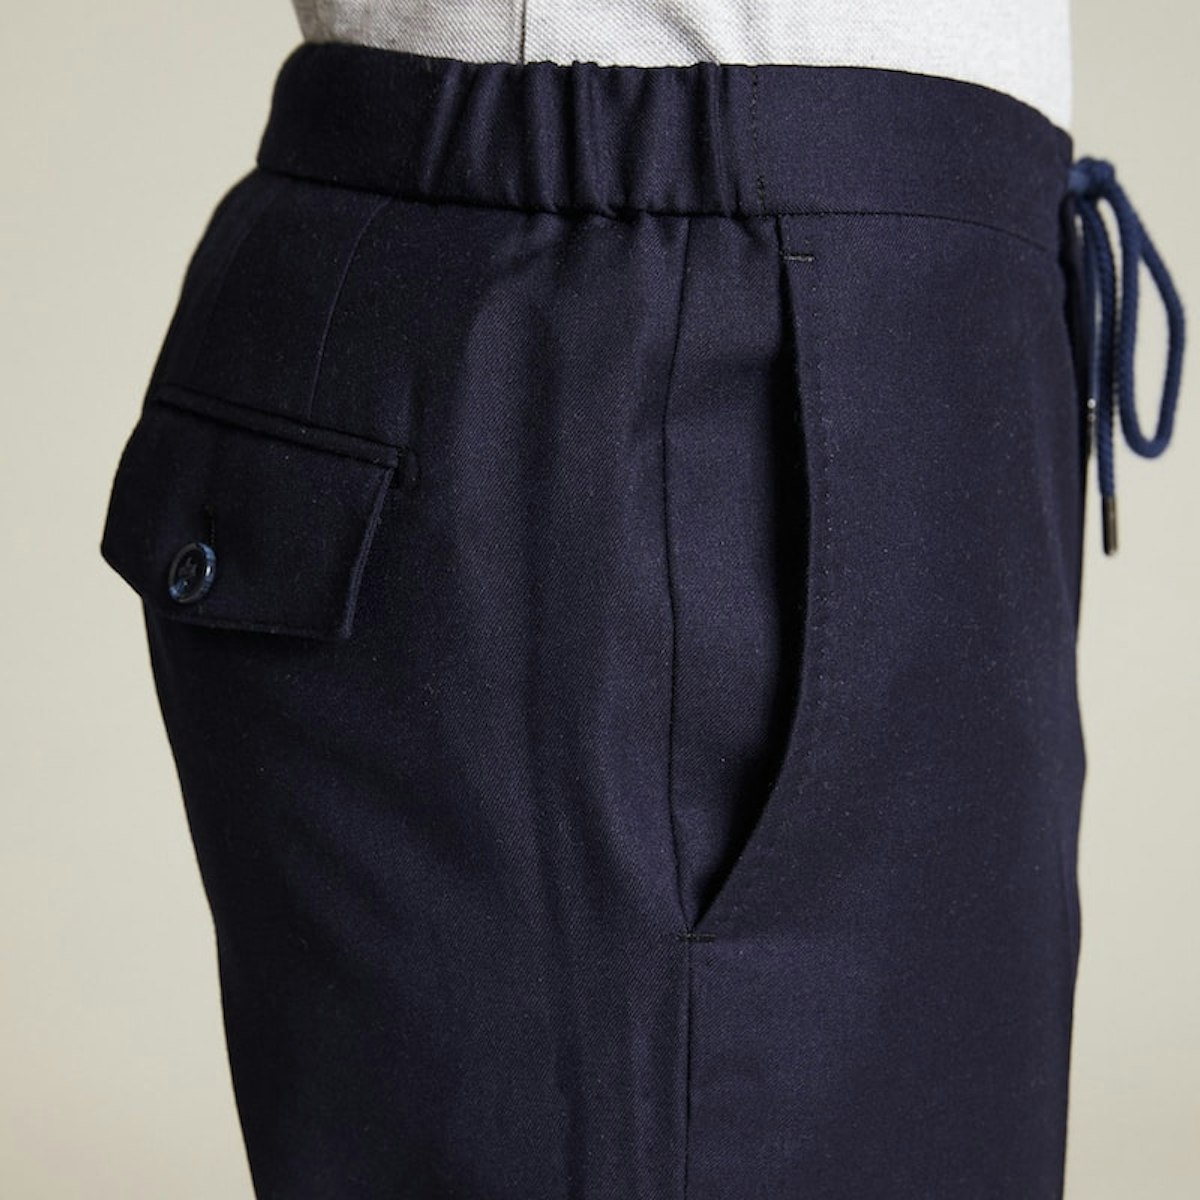 InStitchu Collection The Harrison Navy Flannel Drawstring Pants 